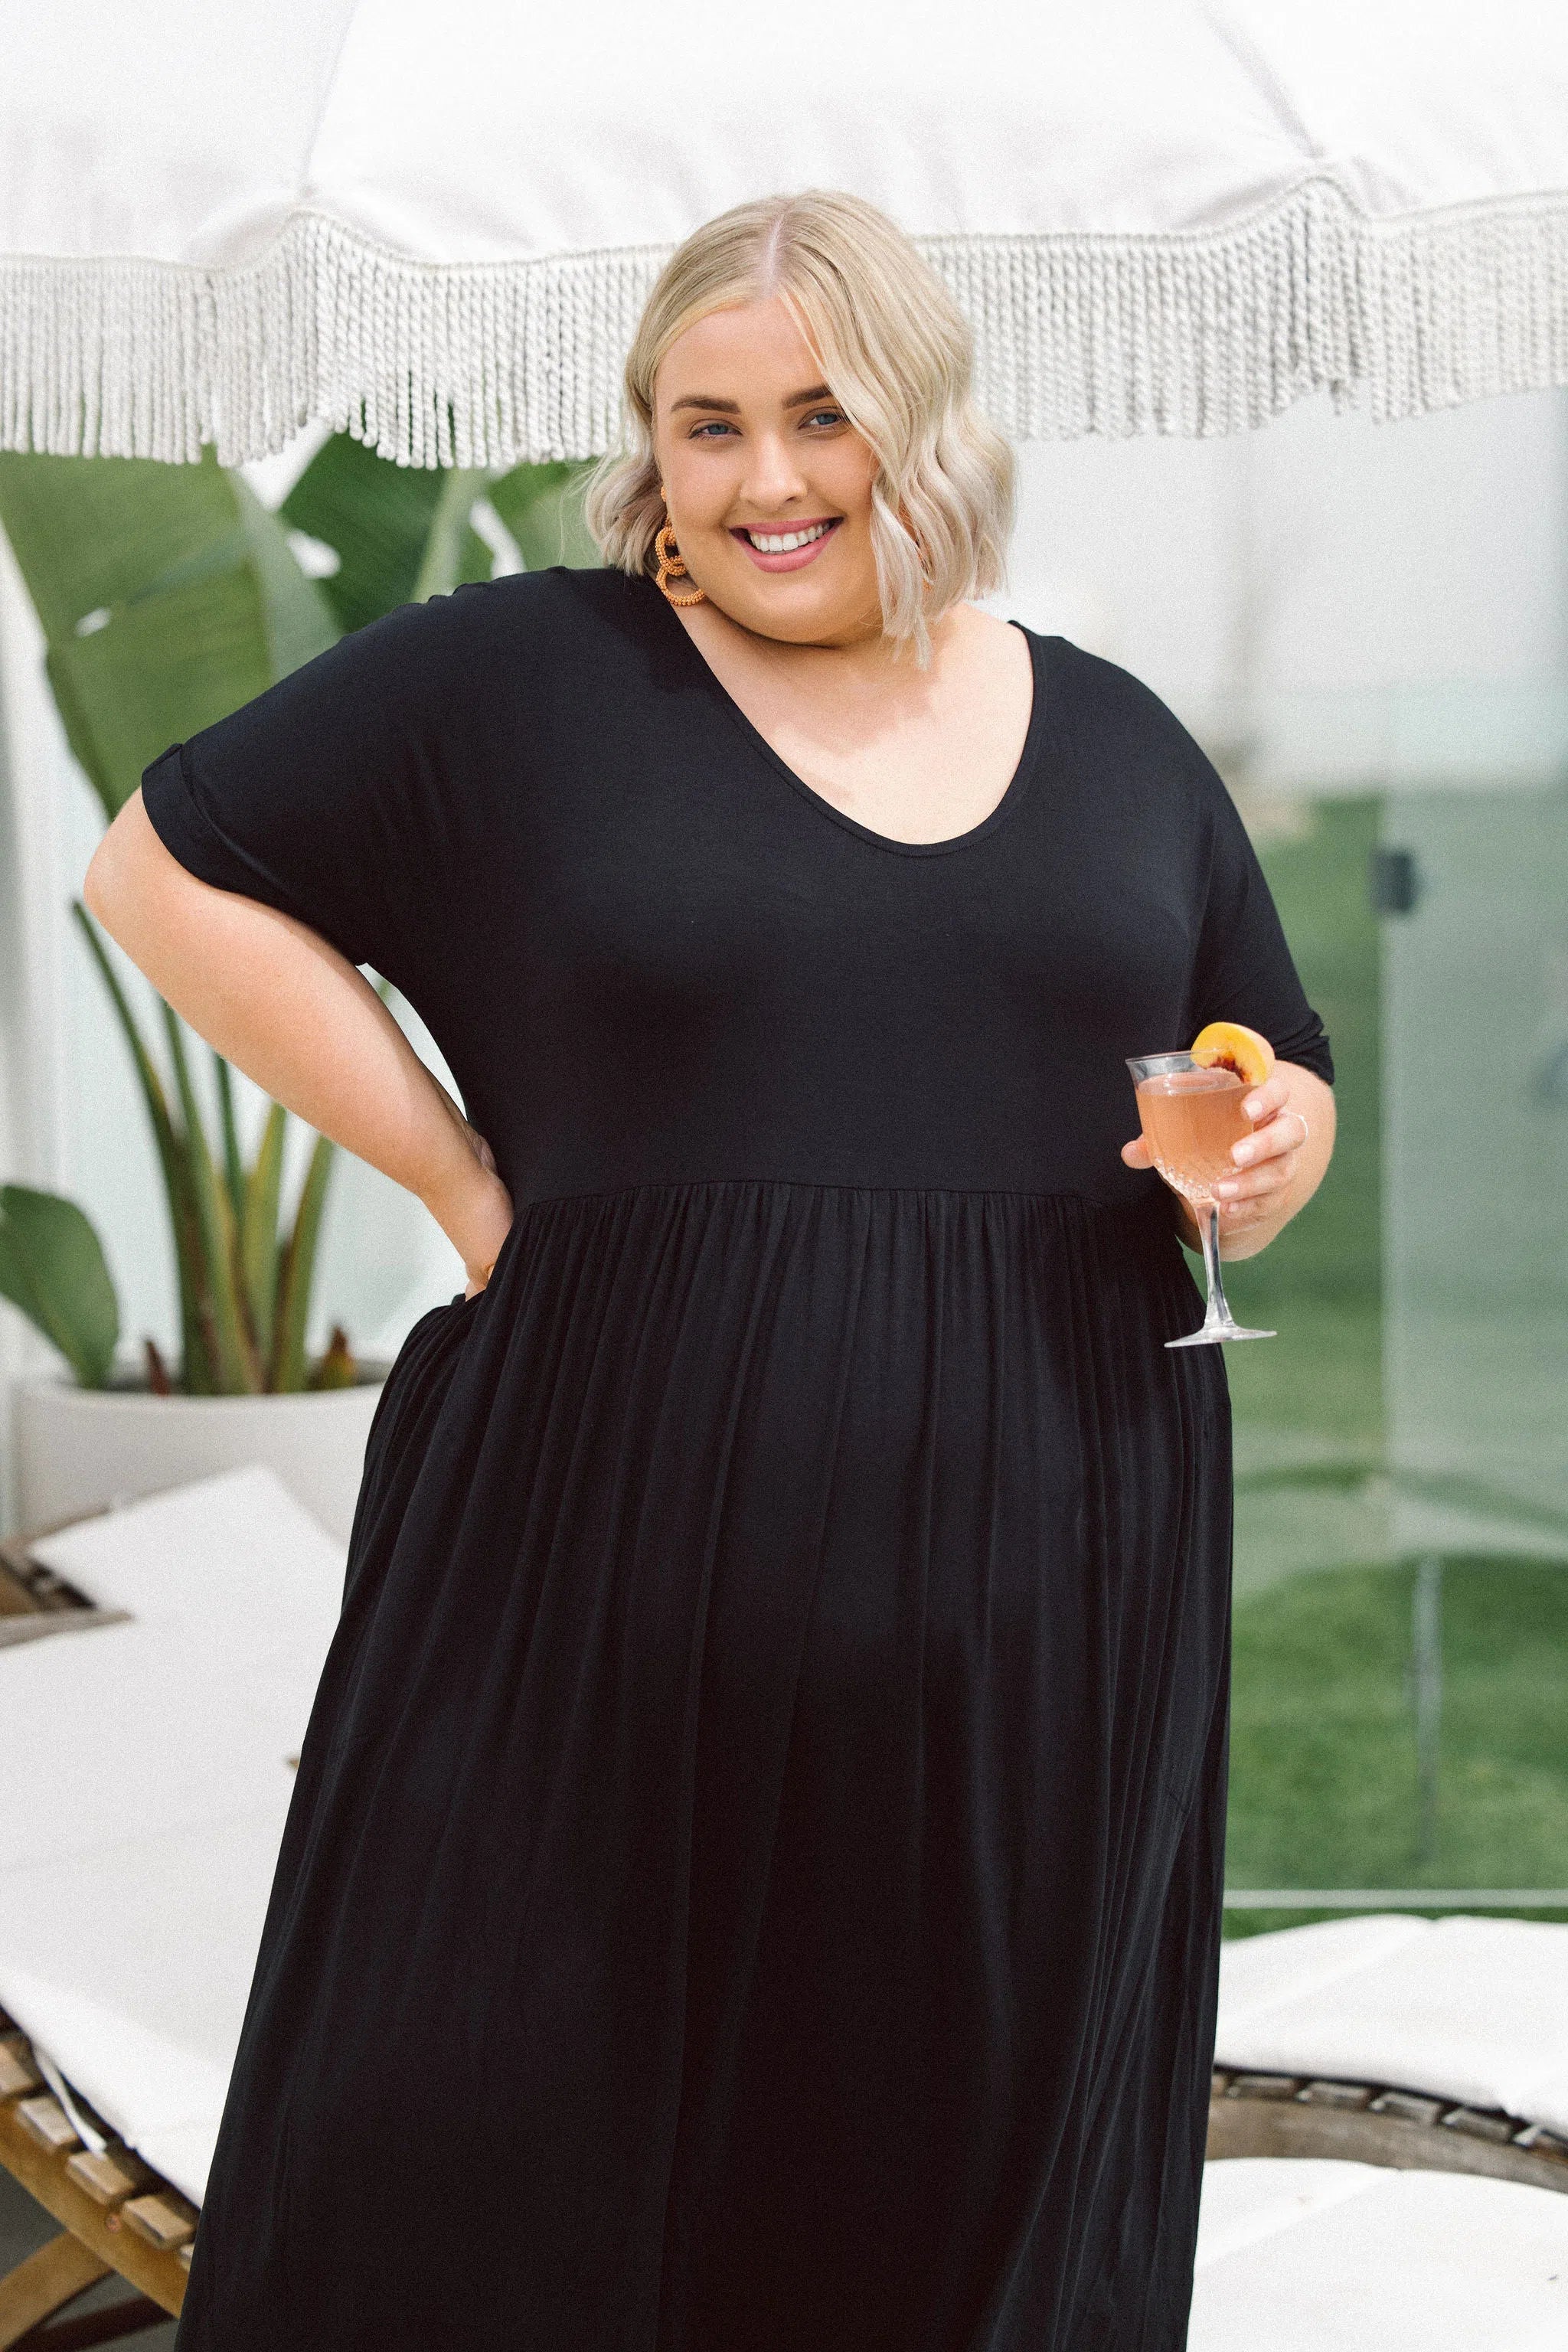 Buy Women's Plus Size Dress Online in Black. Afterpay Available at ...